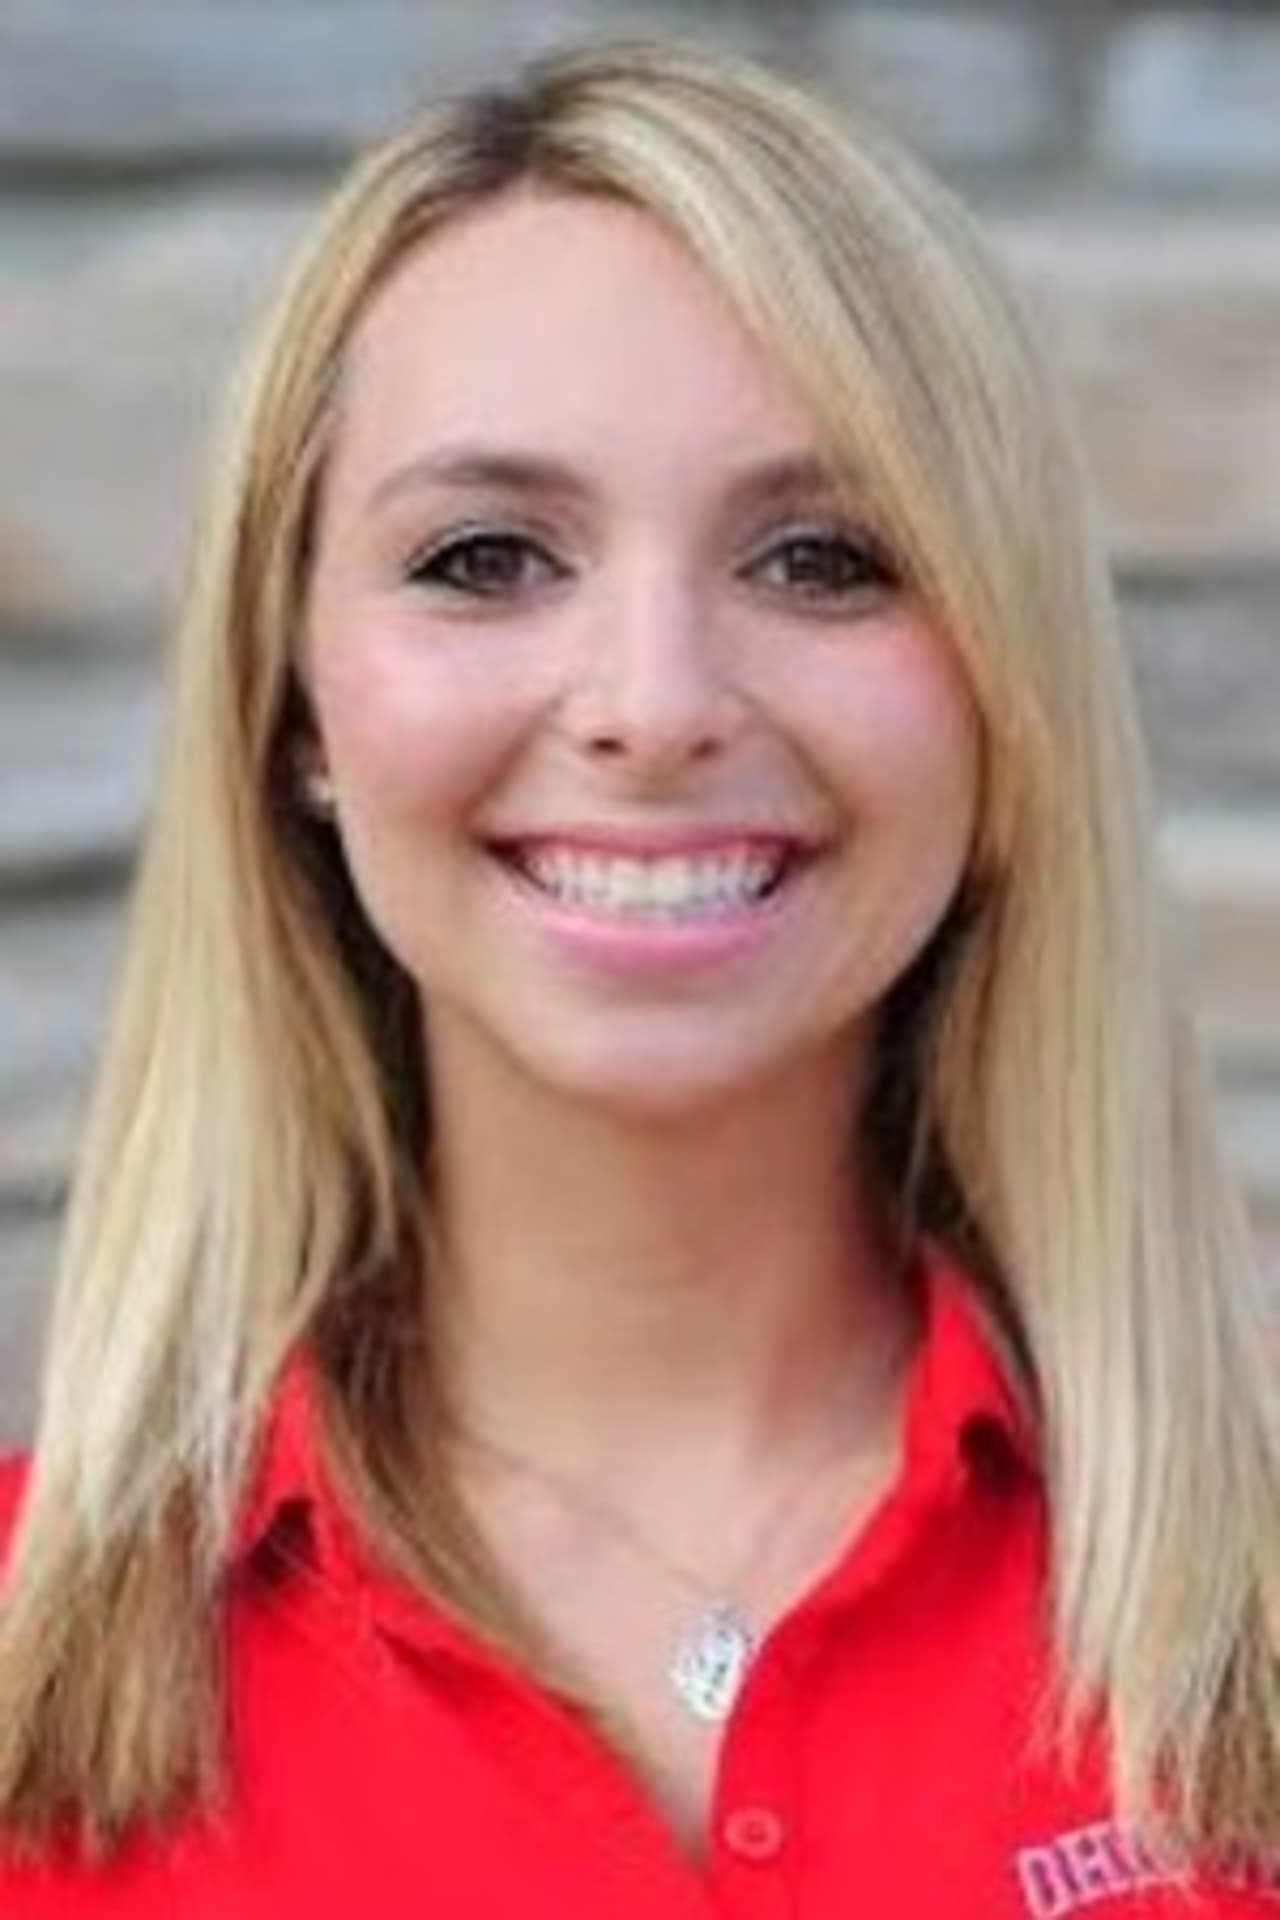 Sami Jurofsky of Westport helped Ohio State win its third straight national championship in women's rowing on Sunday in California.